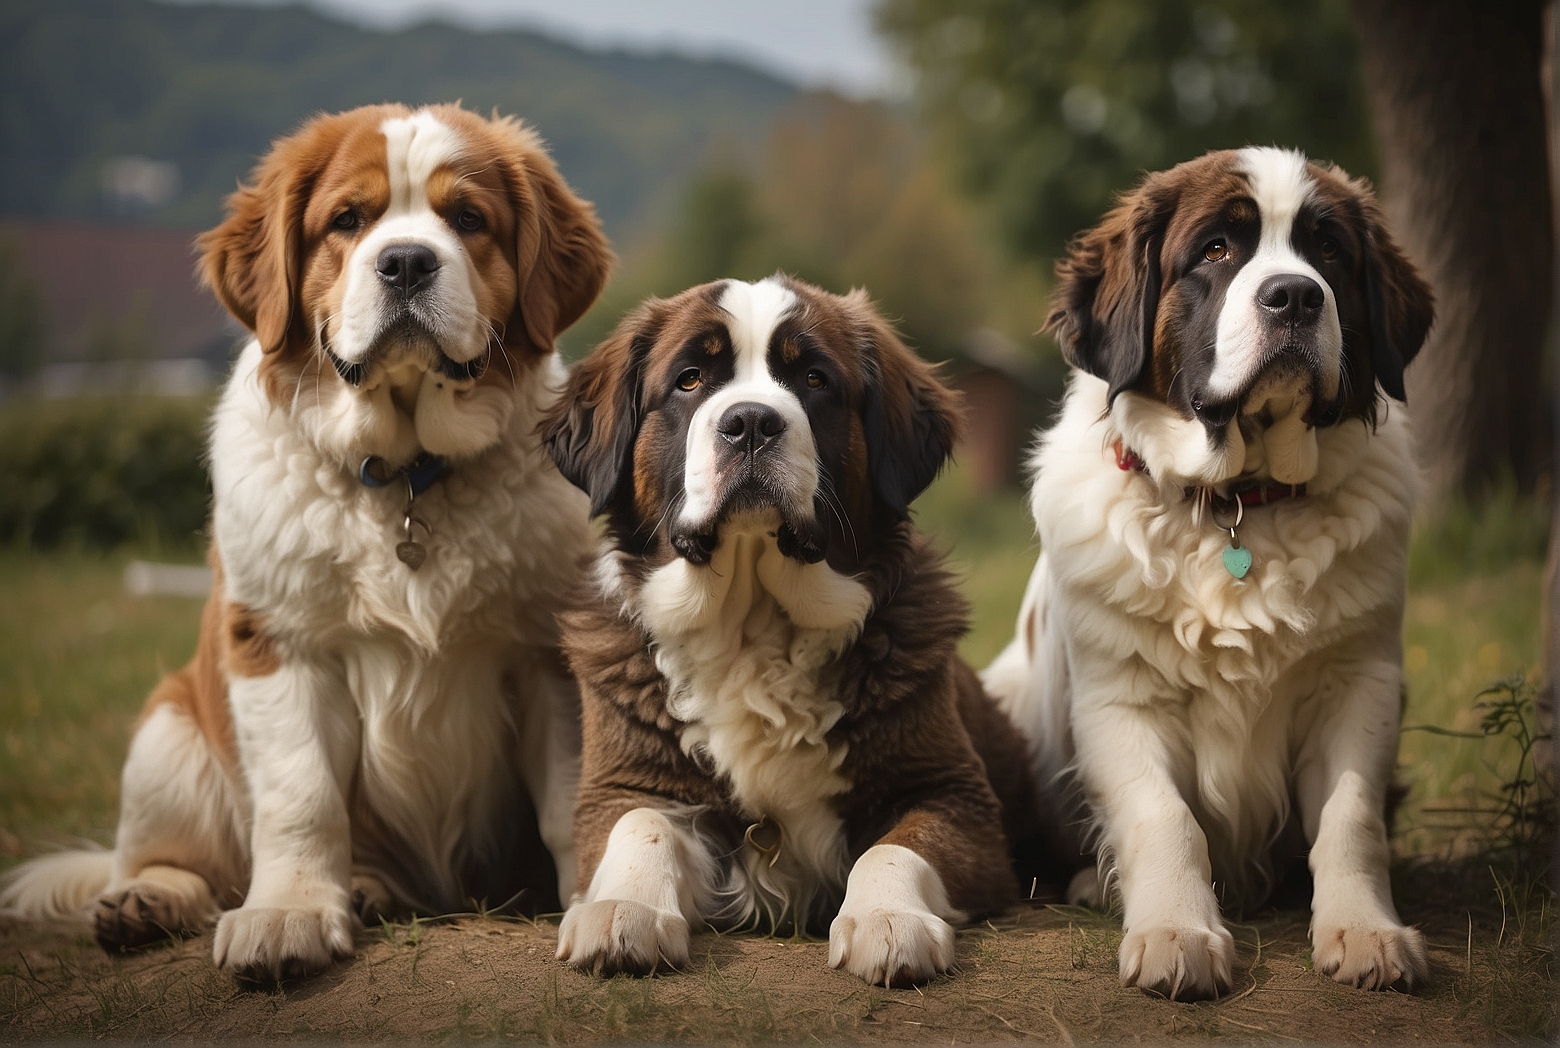 How Do Saint Bernards Get Along with Other Dogs?